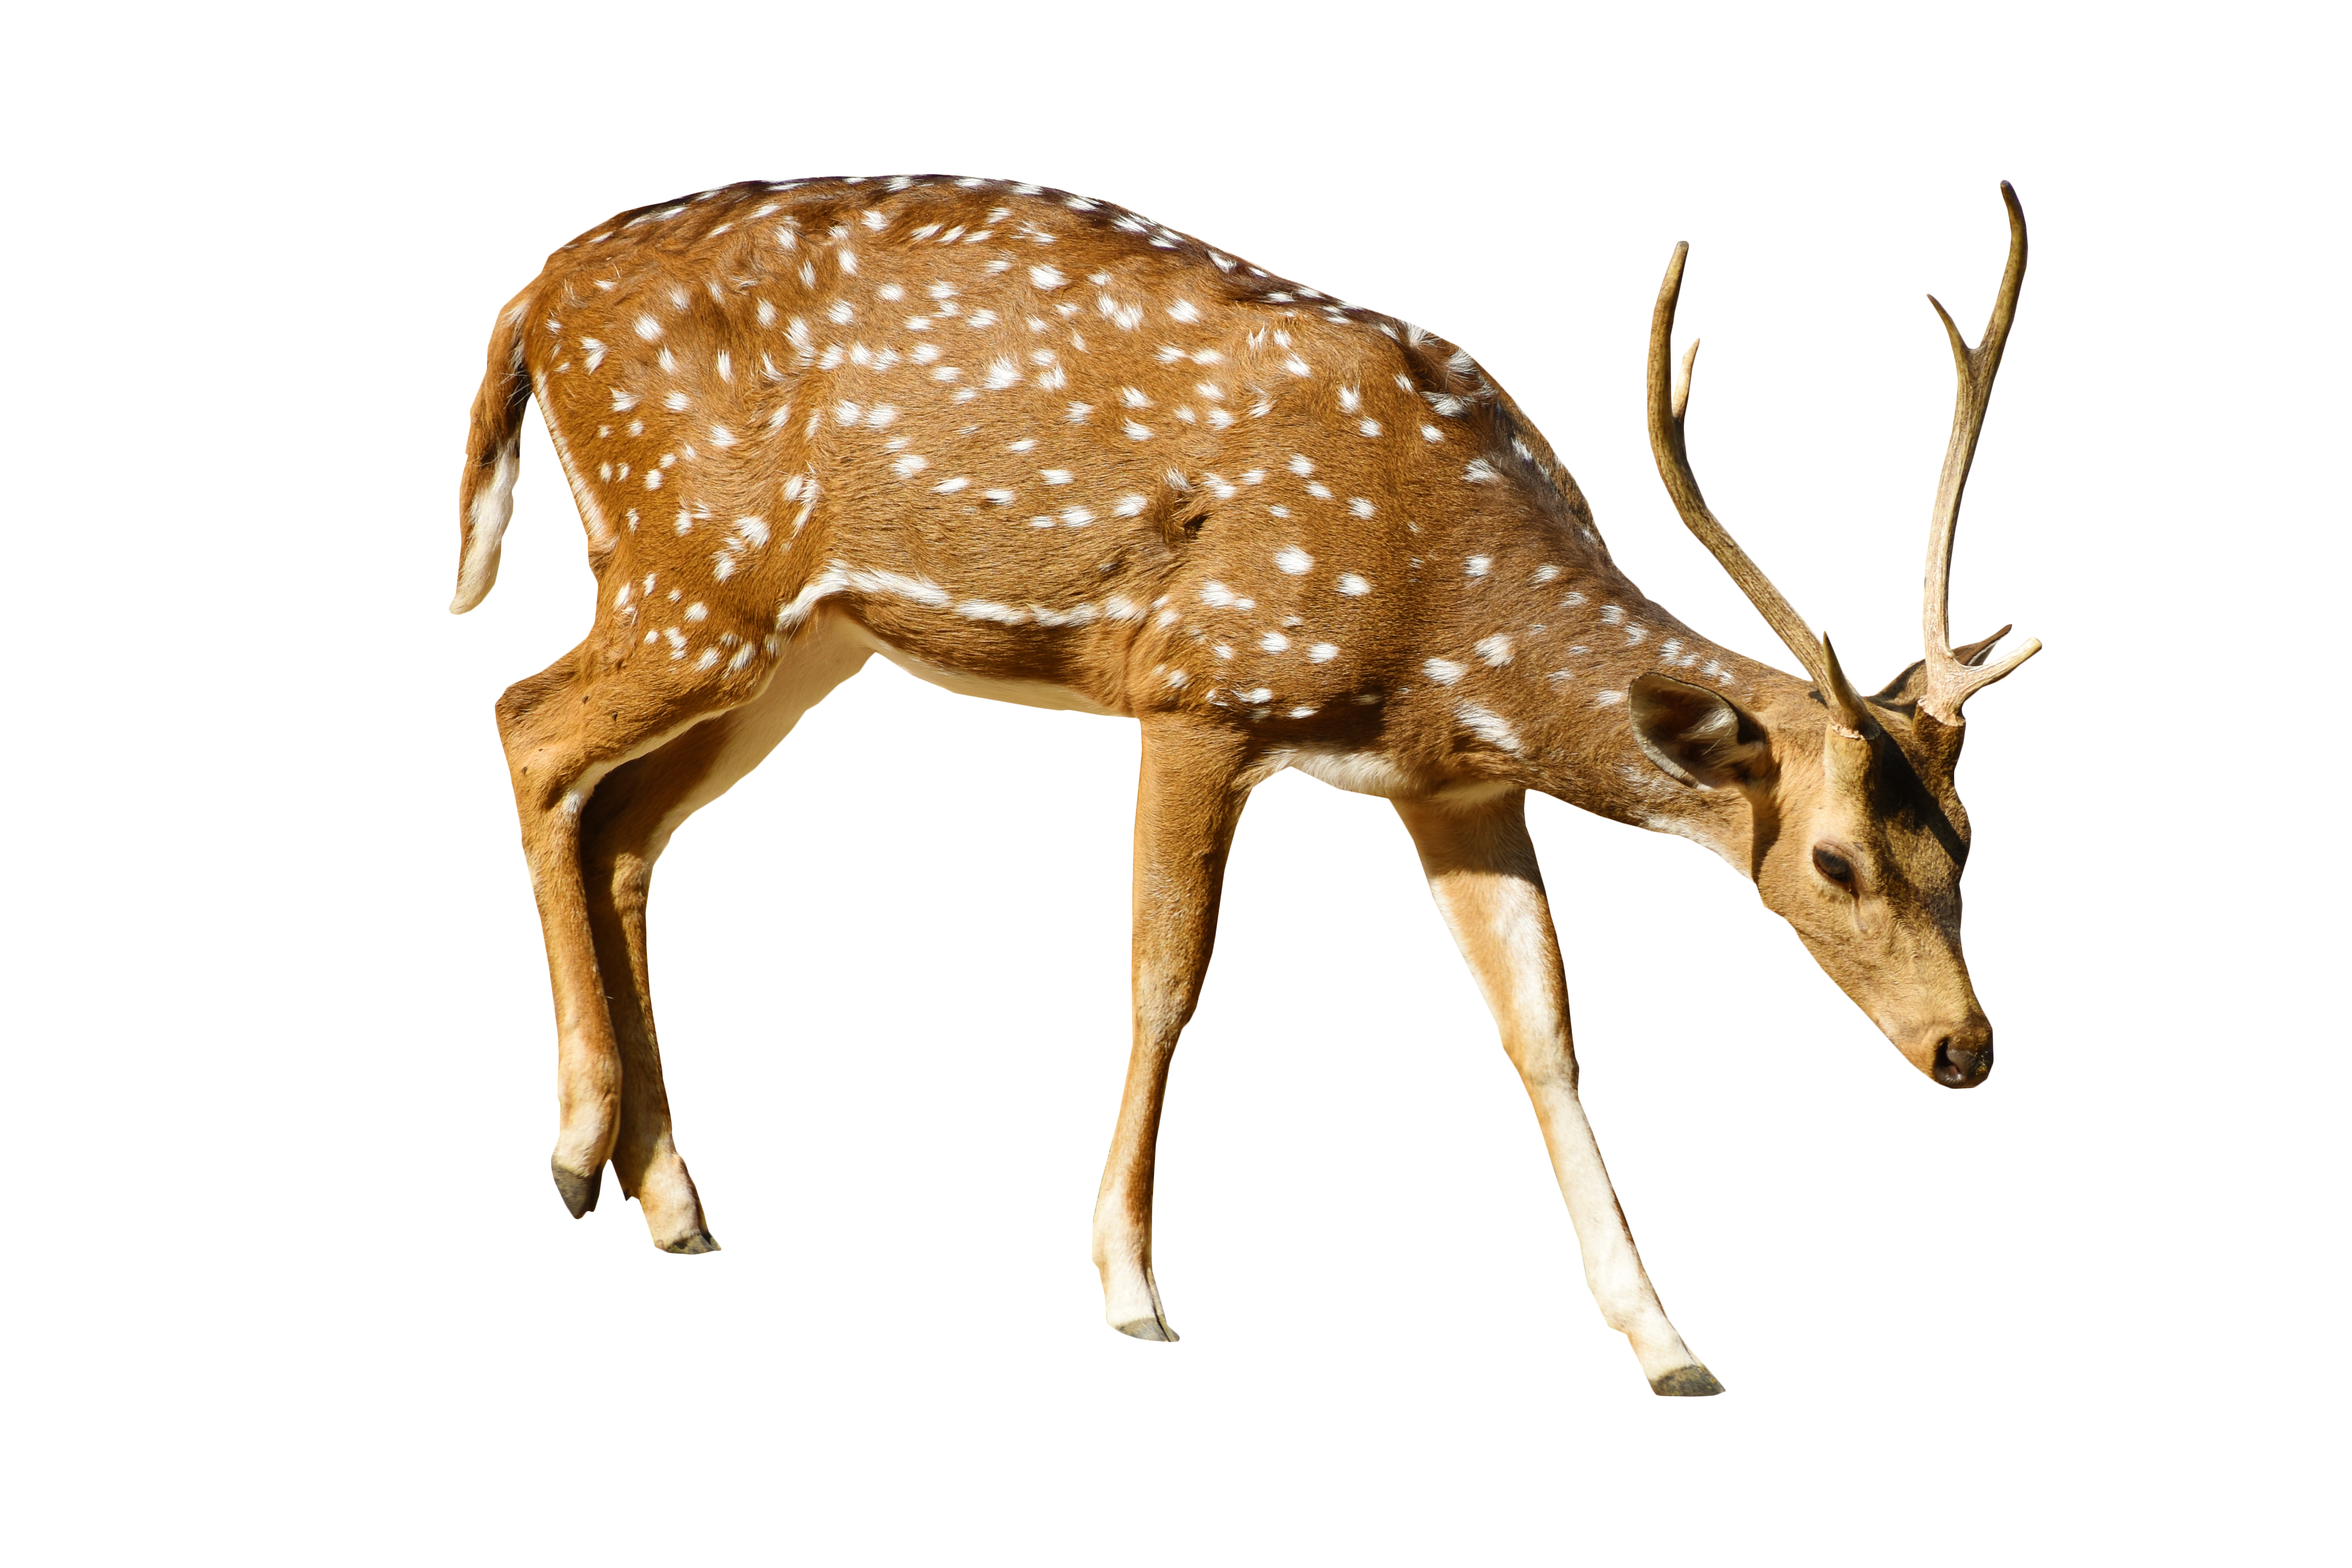 Brown Deer With White Spots Standing